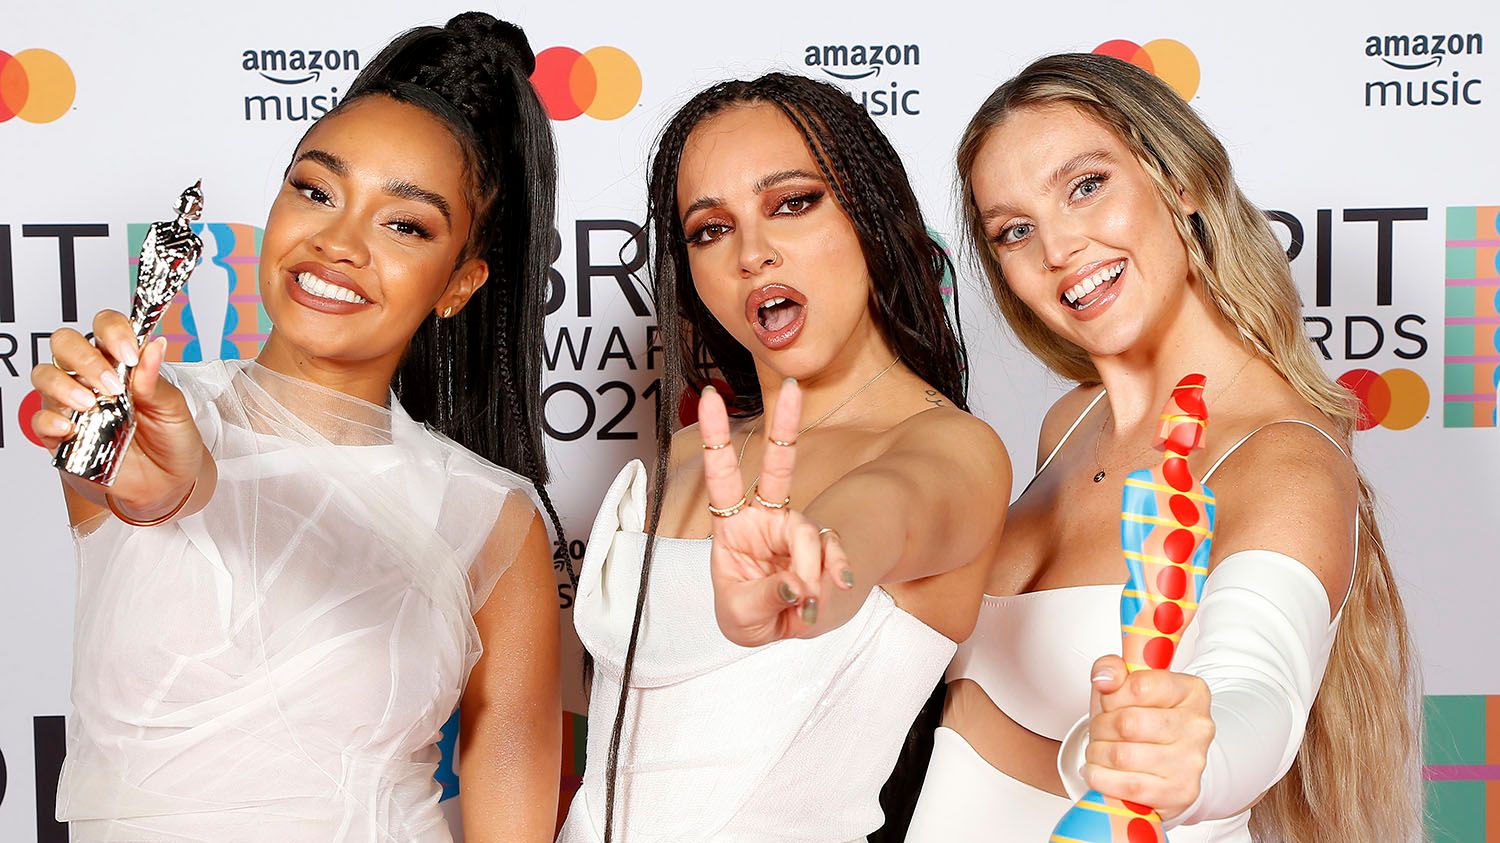 Fans couldn't get enough of Little Mix's AMAZING performance on